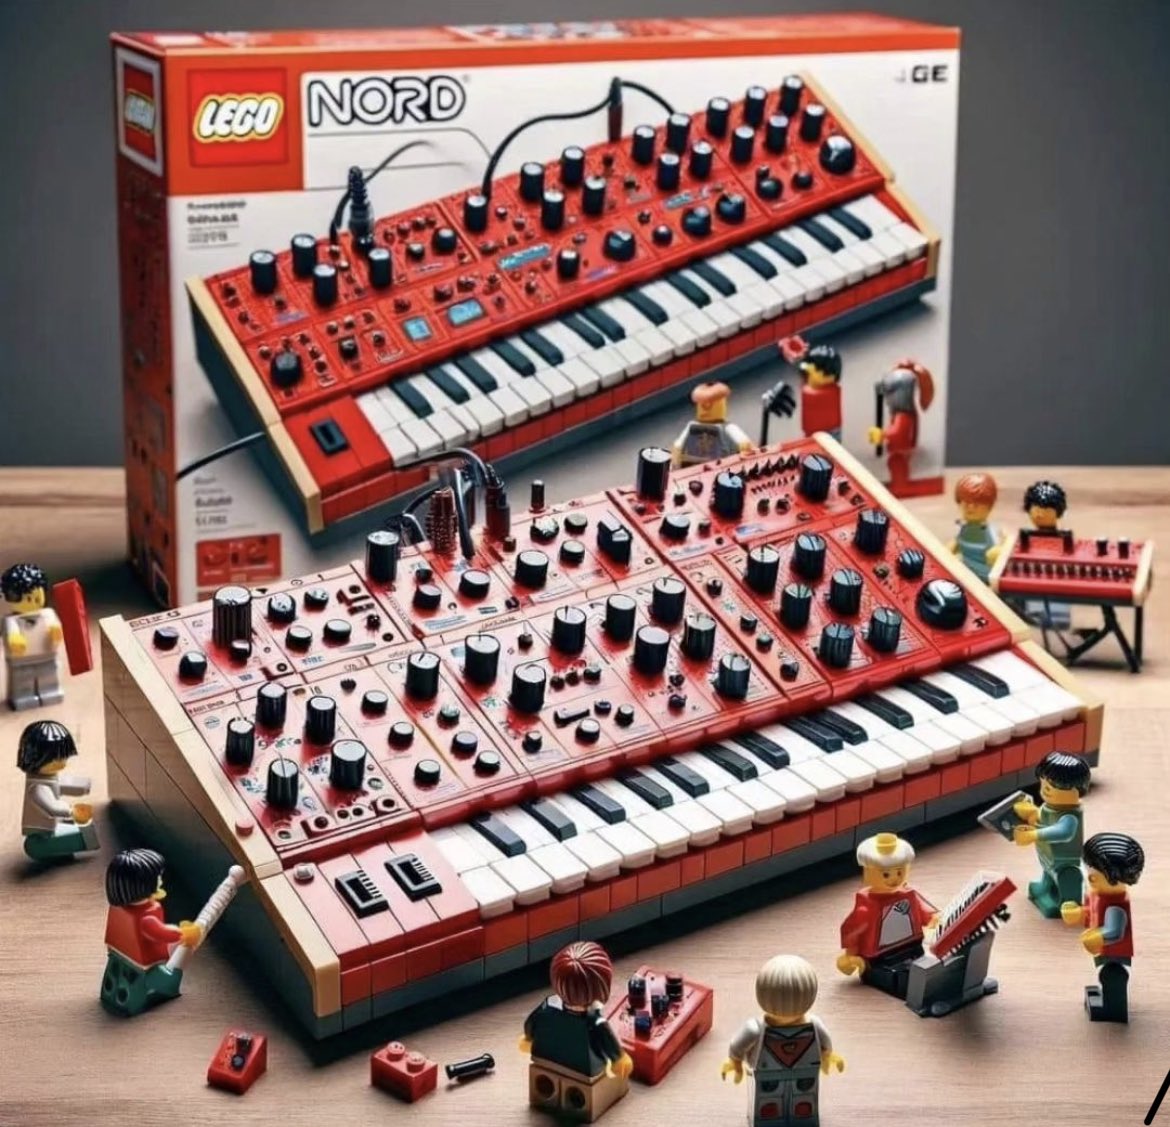 Please tell me I’m not the only one who thinks these lego synths are AMAZING?! 🔥🔥